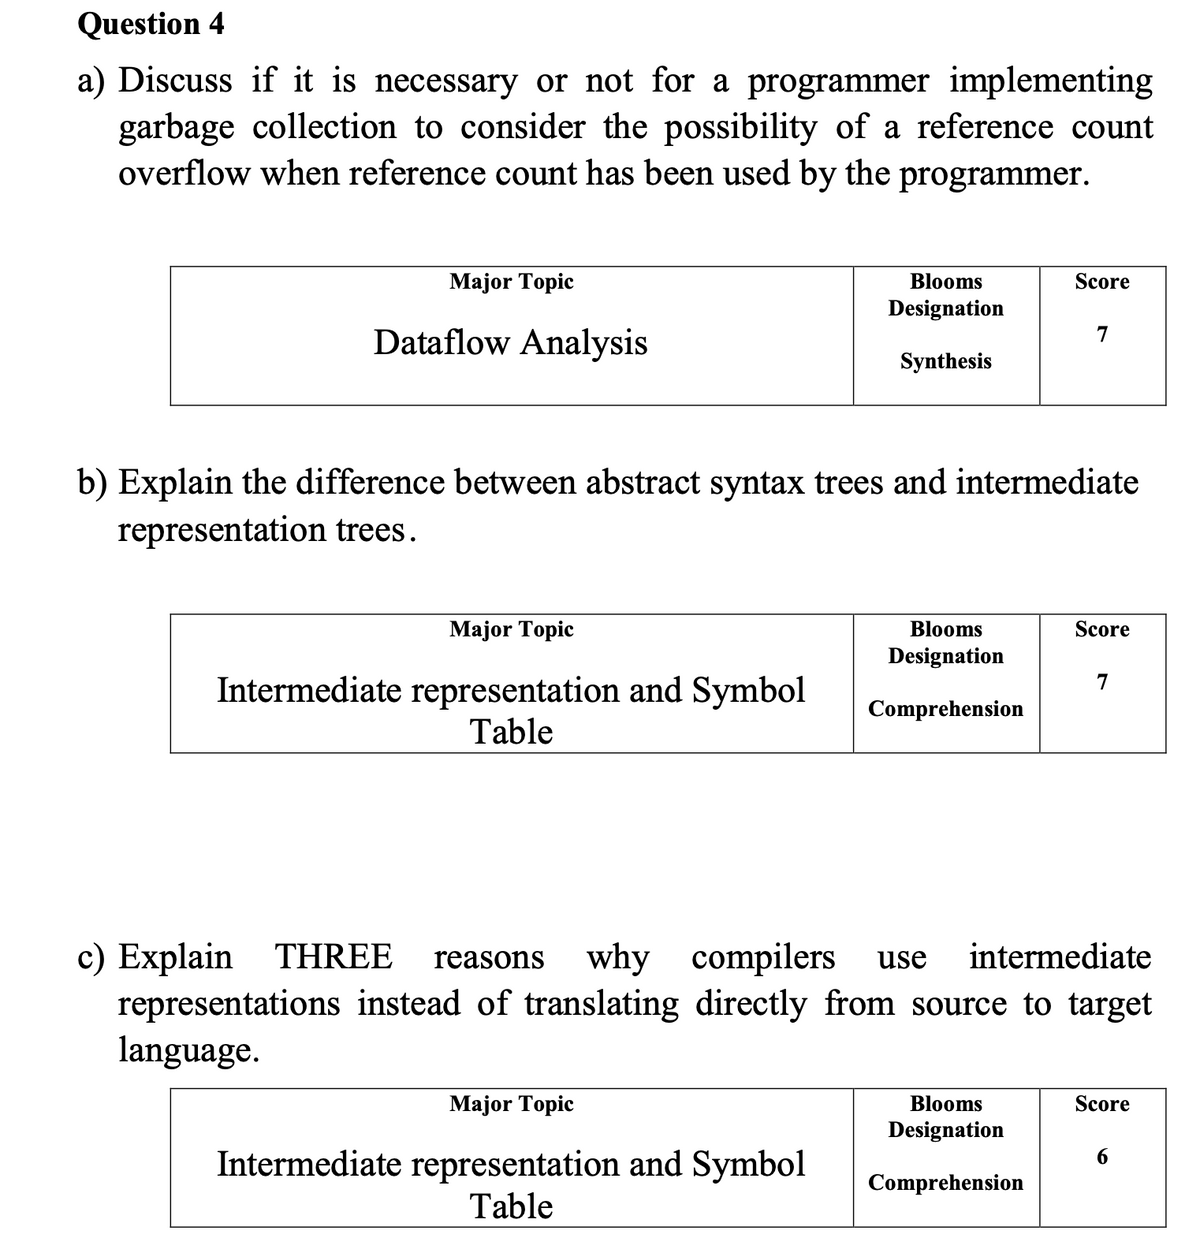 Question 4
a) Discuss if it is necessary or not for a programmer implementing
garbage collection to consider the possibility of a reference count
overflow when reference count has been used by the programmer.
Major Topic
Dataflow Analysis
Major Topic
Intermediate representation and Symbol
Table
b) Explain the difference between abstract syntax trees and intermediate
representation trees.
Blooms
Designation
Synthesis
Major Topic
Intermediate representation and Symbol
Table
Blooms
Designation
Comprehension
Score
7
Blooms
Designation
Comprehension
c) Explain THREE reasons why compilers use intermediate
representations instead of translating directly from source to target
language.
Score
7
Score
6